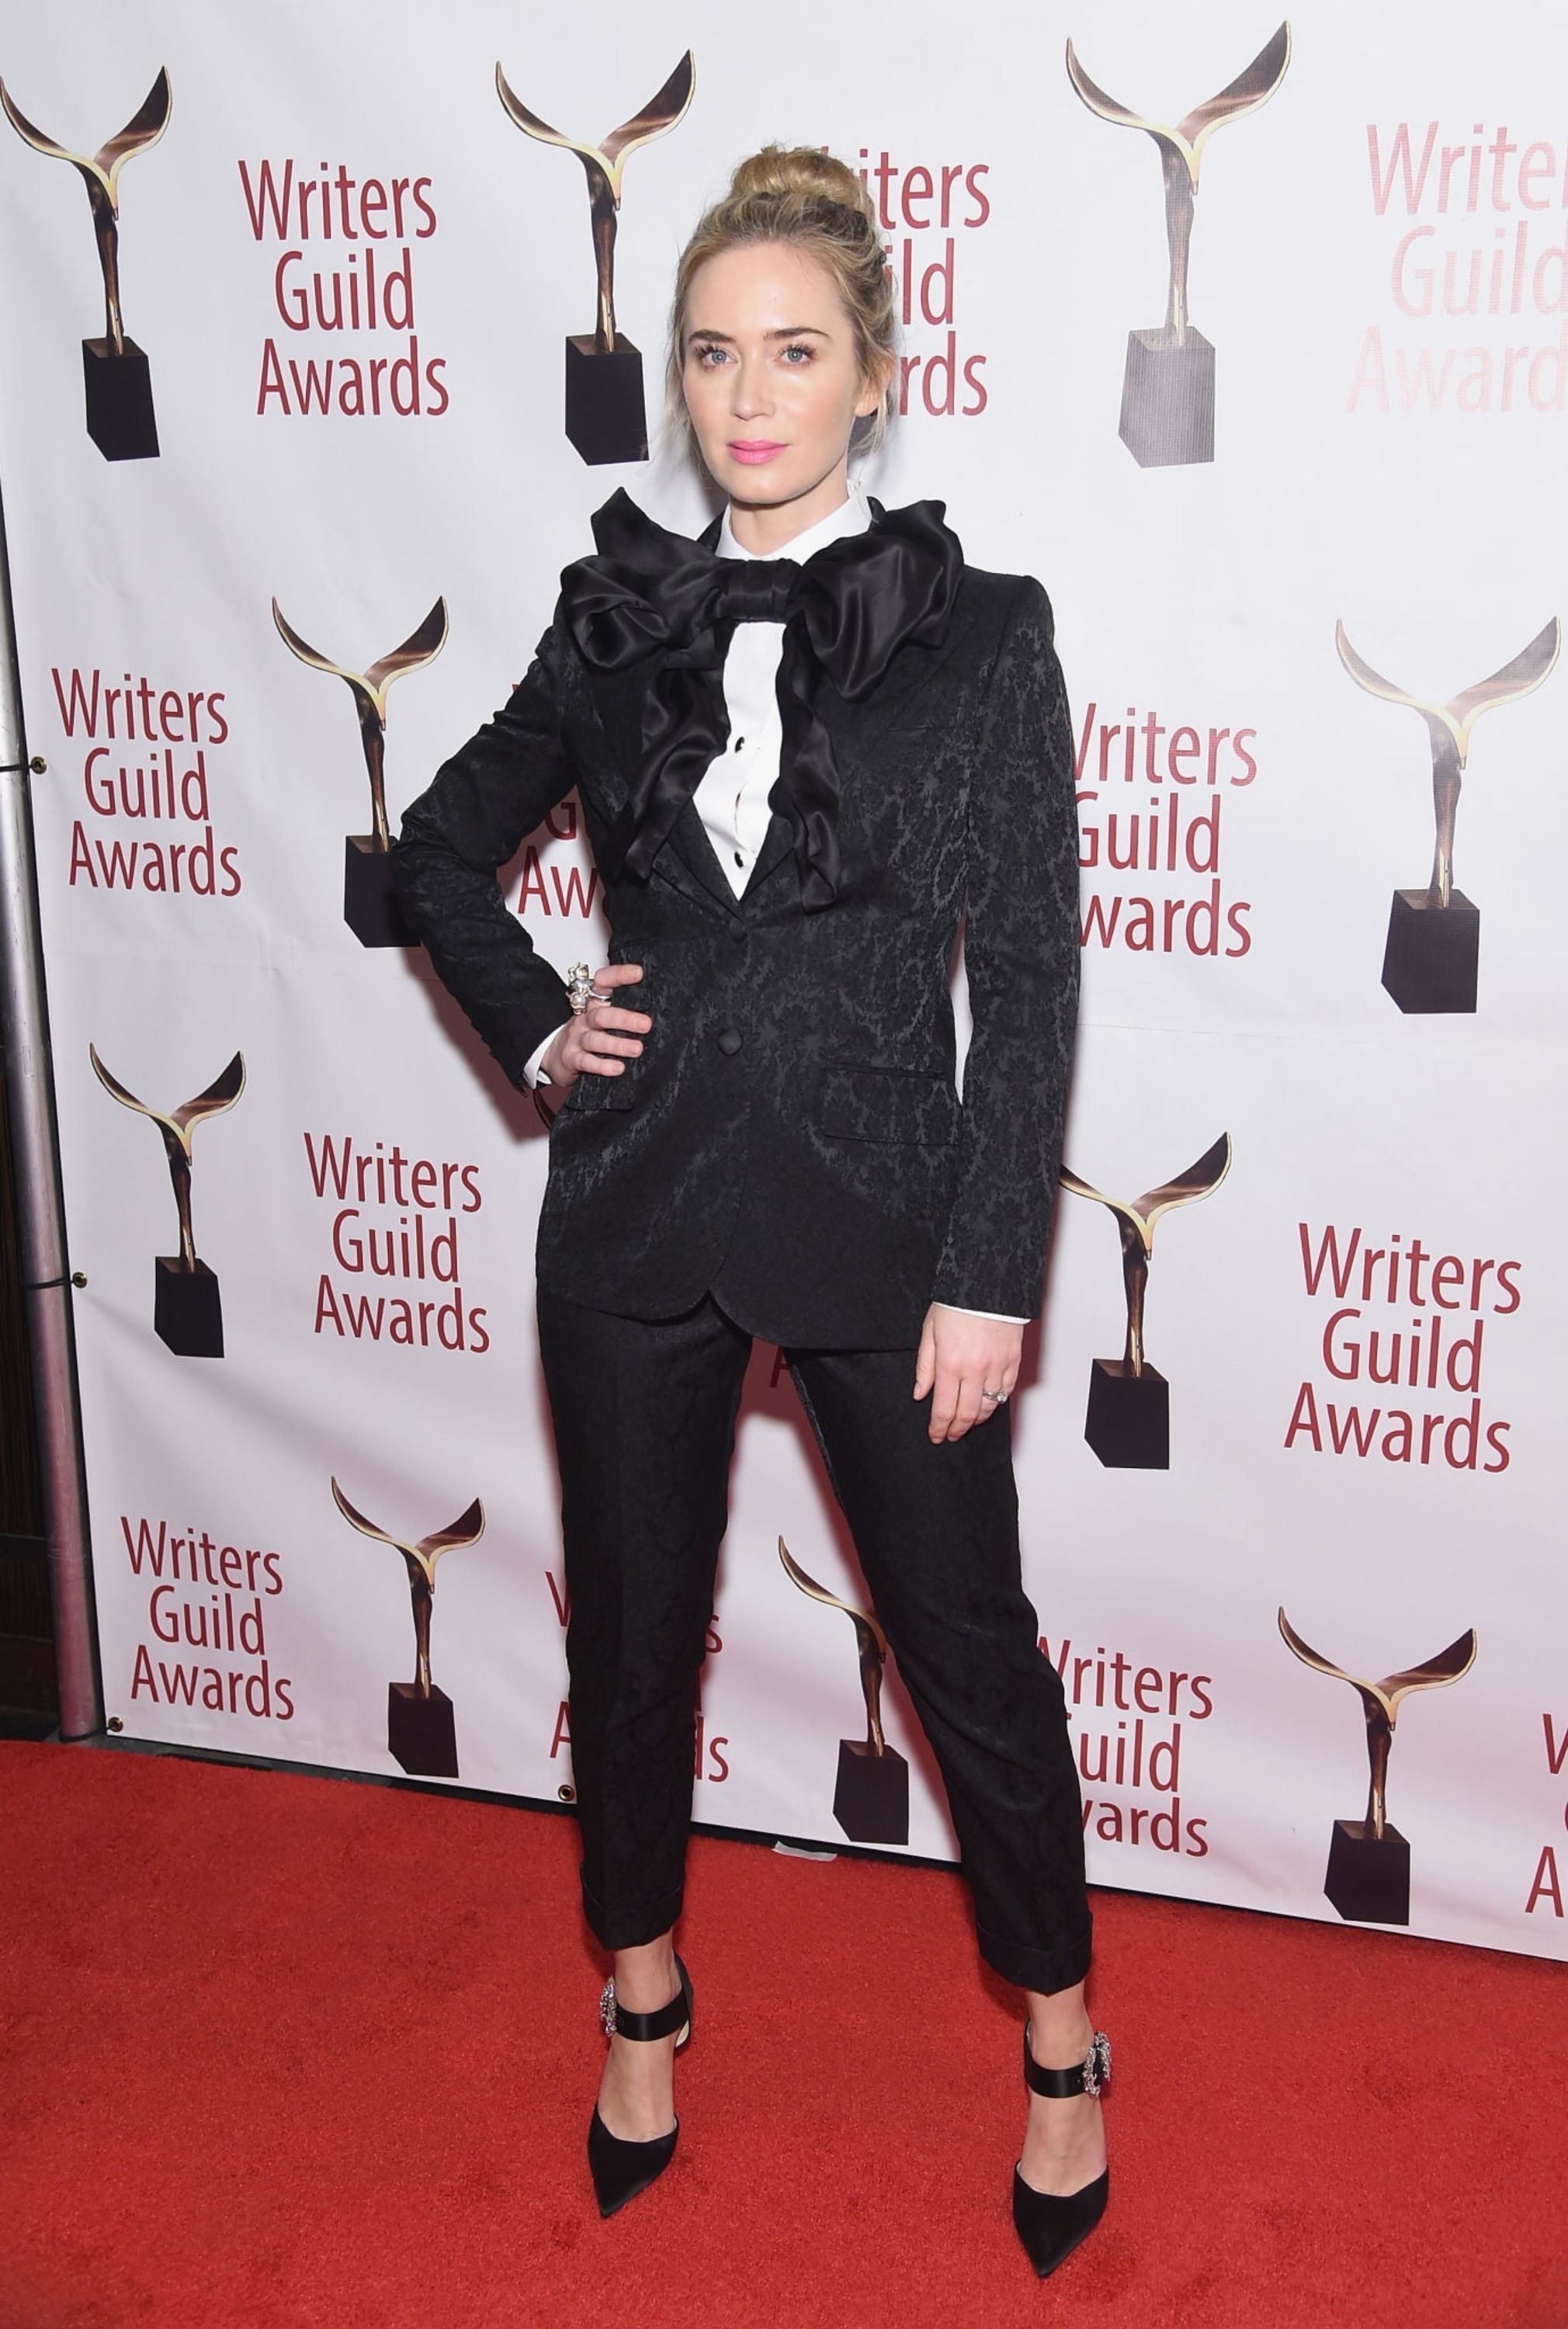 2019-02-17-71st-Annual-Writers-Guild-Awards-002.jpg